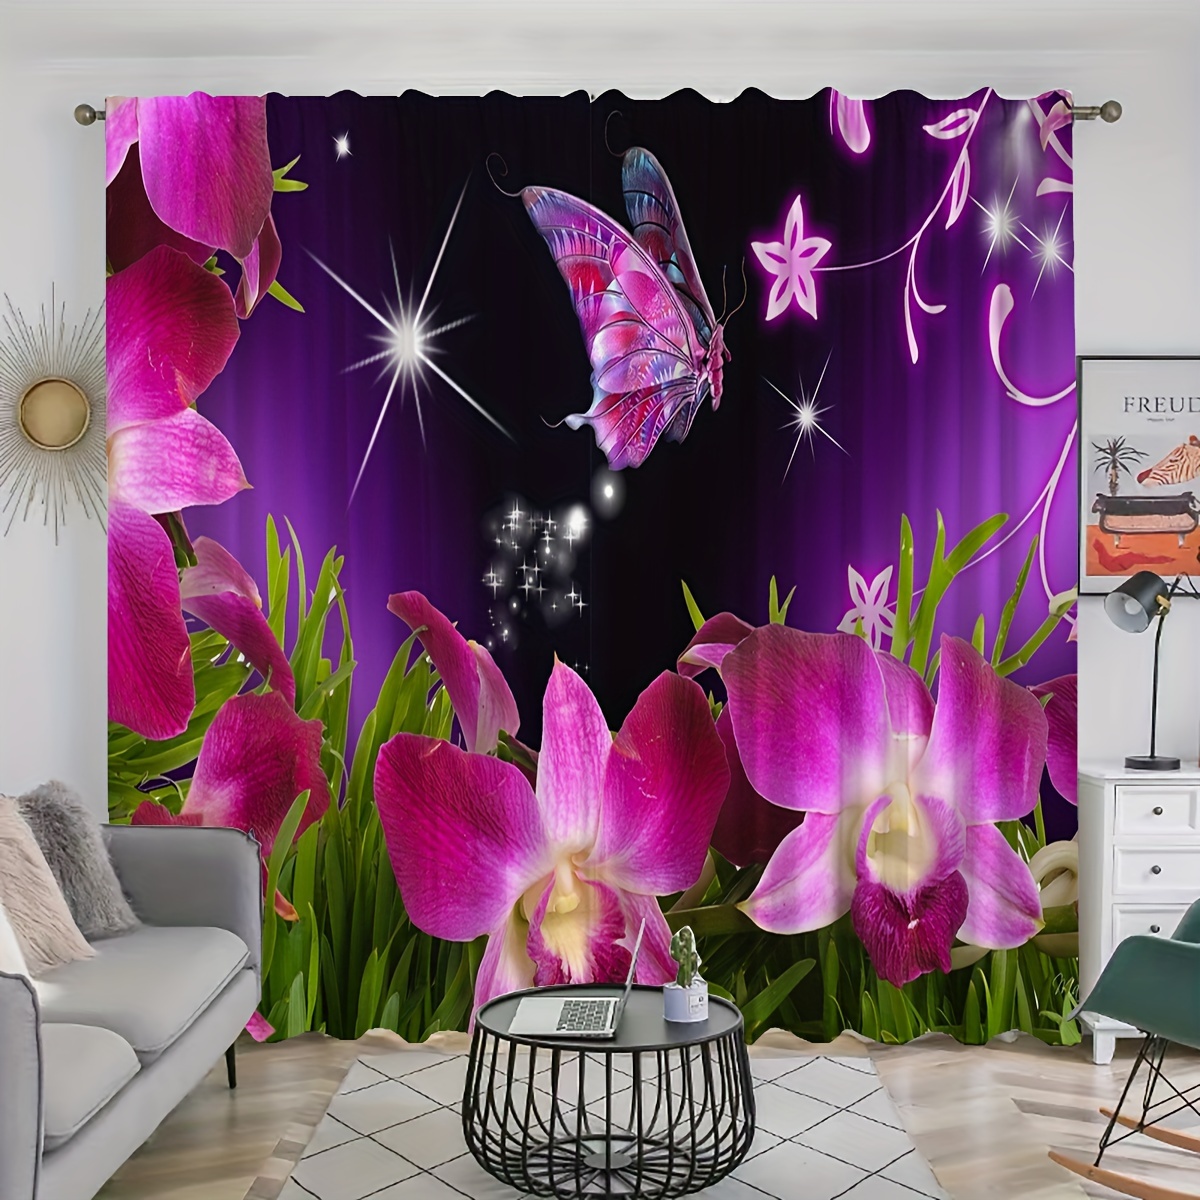 

2pcs, Beautiful Flower And Butterfly Printed Curtains, Rod Pocket Curtain, Suitable For Restaurants, Public Places, Living Rooms, Bedrooms, Offices, Study Rooms, Home Decoration